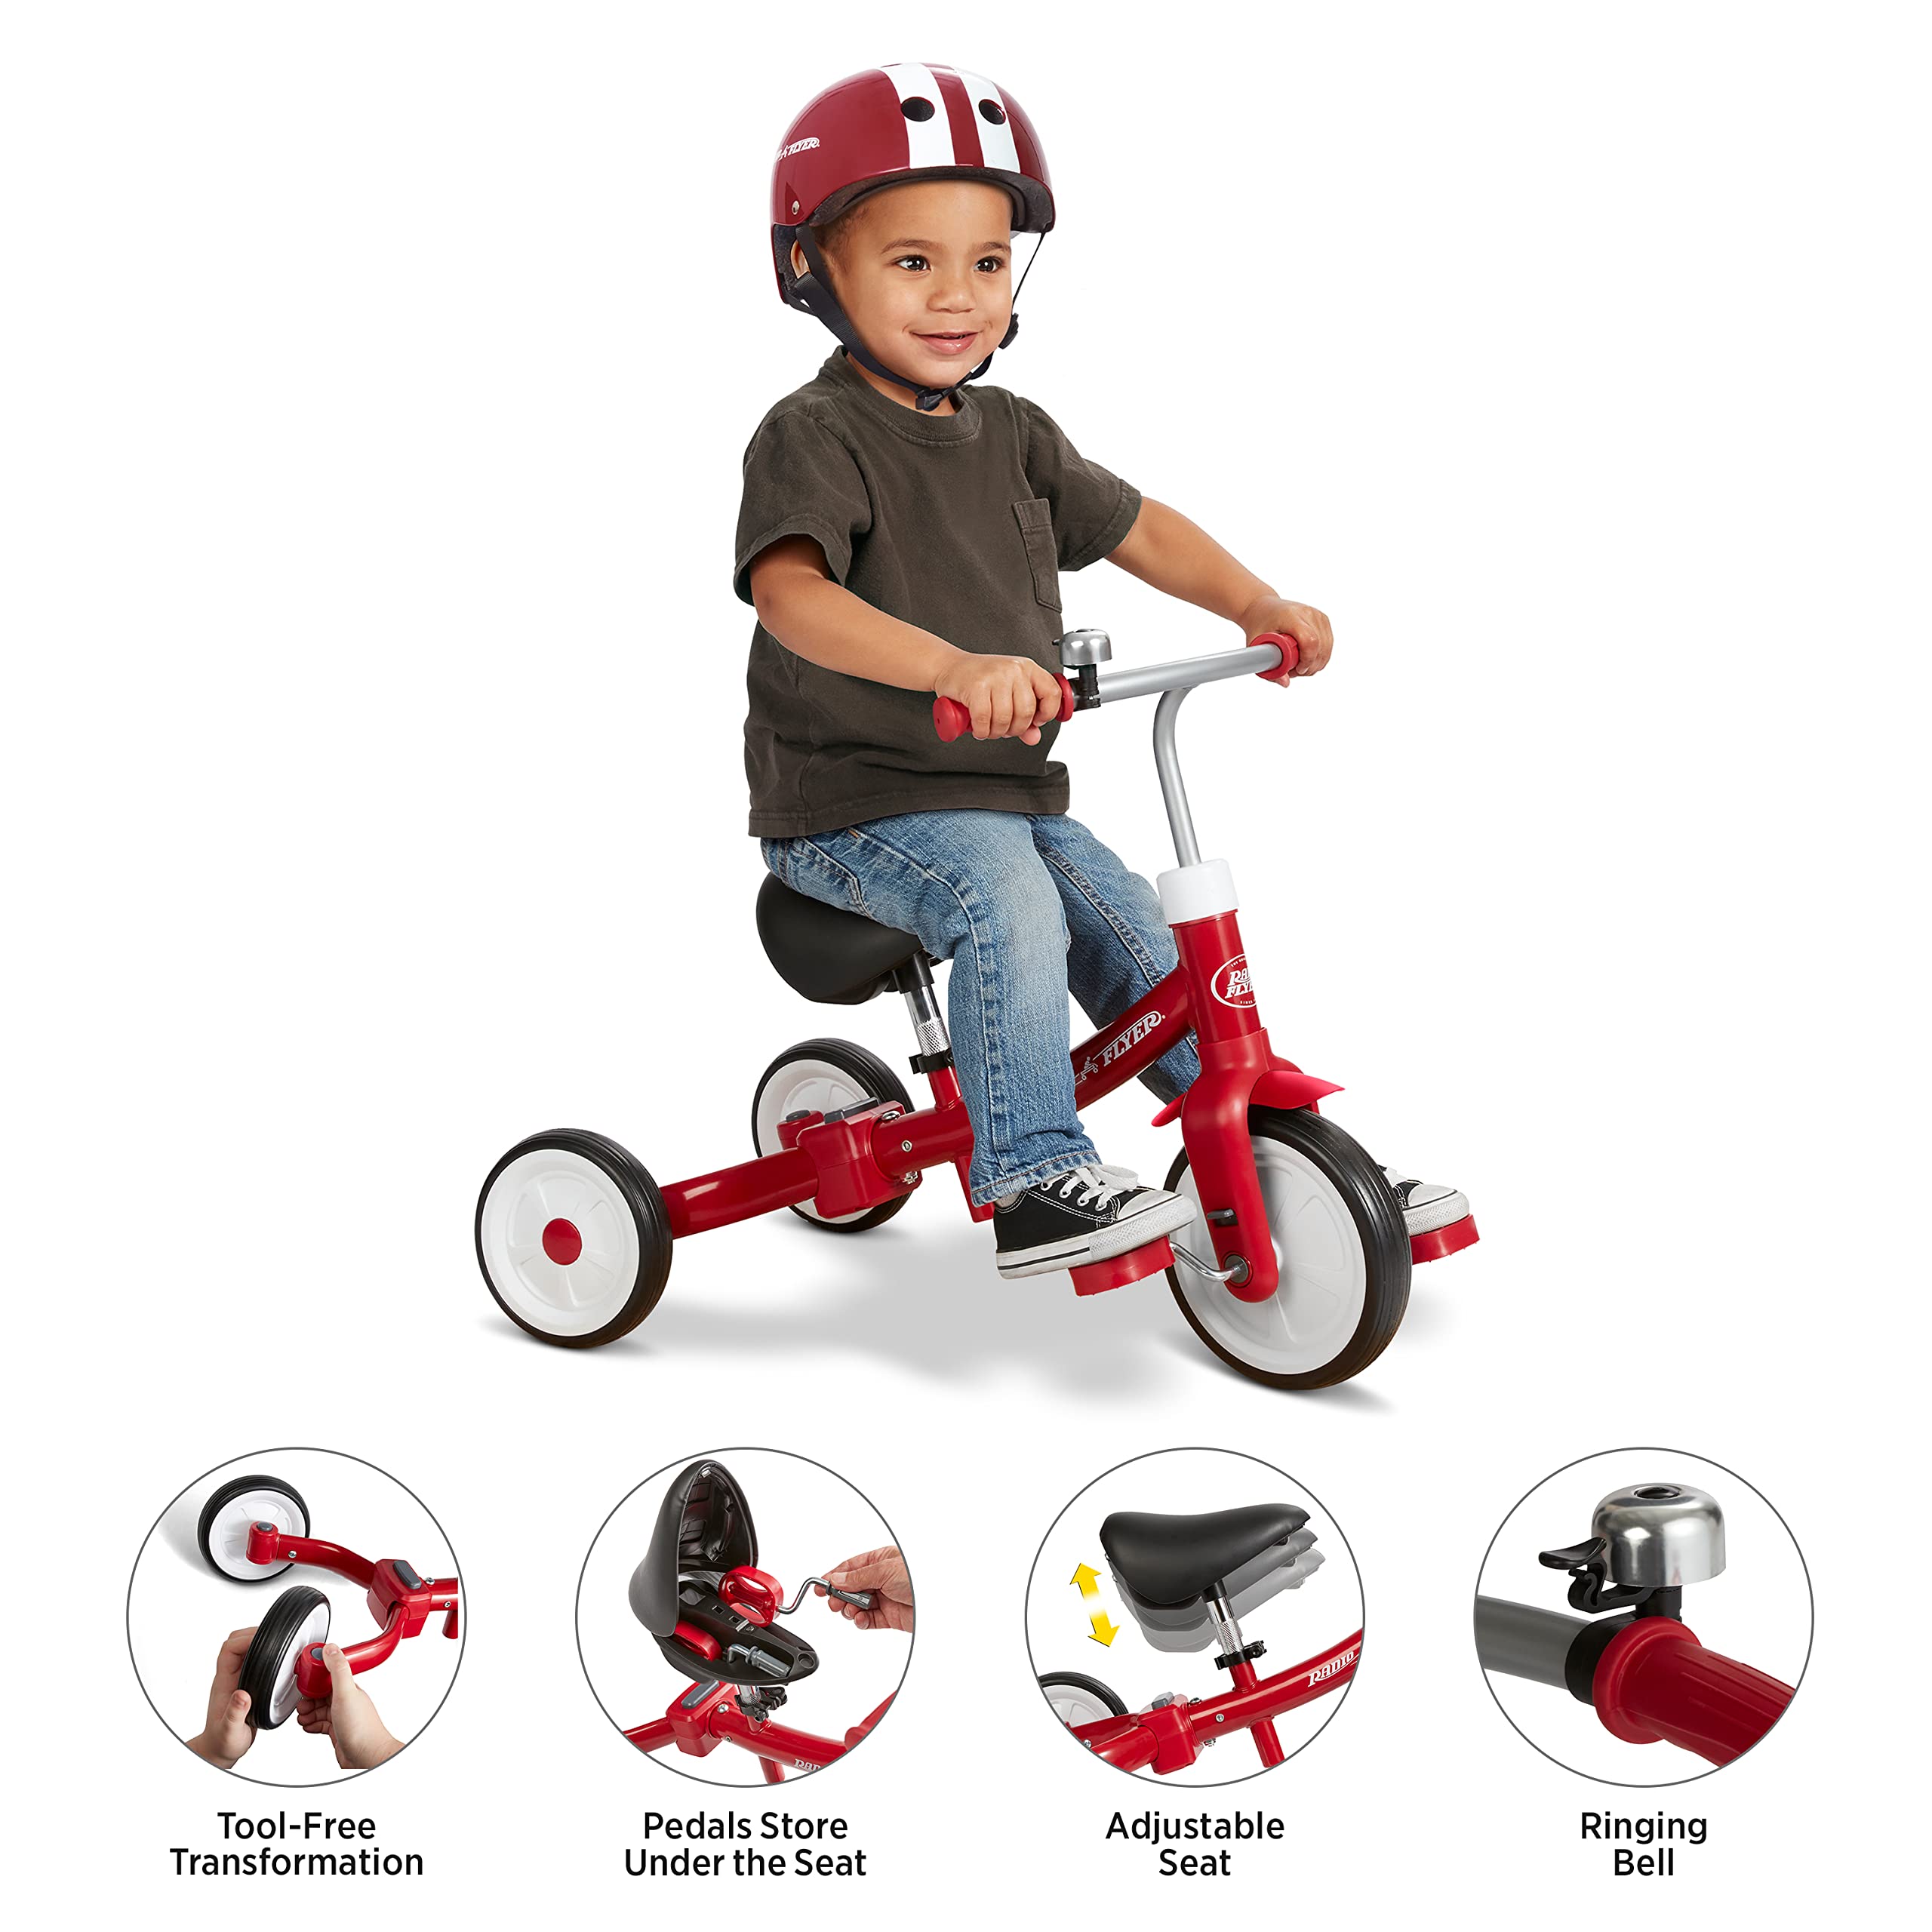 Radio Flyer Triple Play Trike, Toddler Tricycle, Balance Bike and Ride-On, Ages 1-3, Large